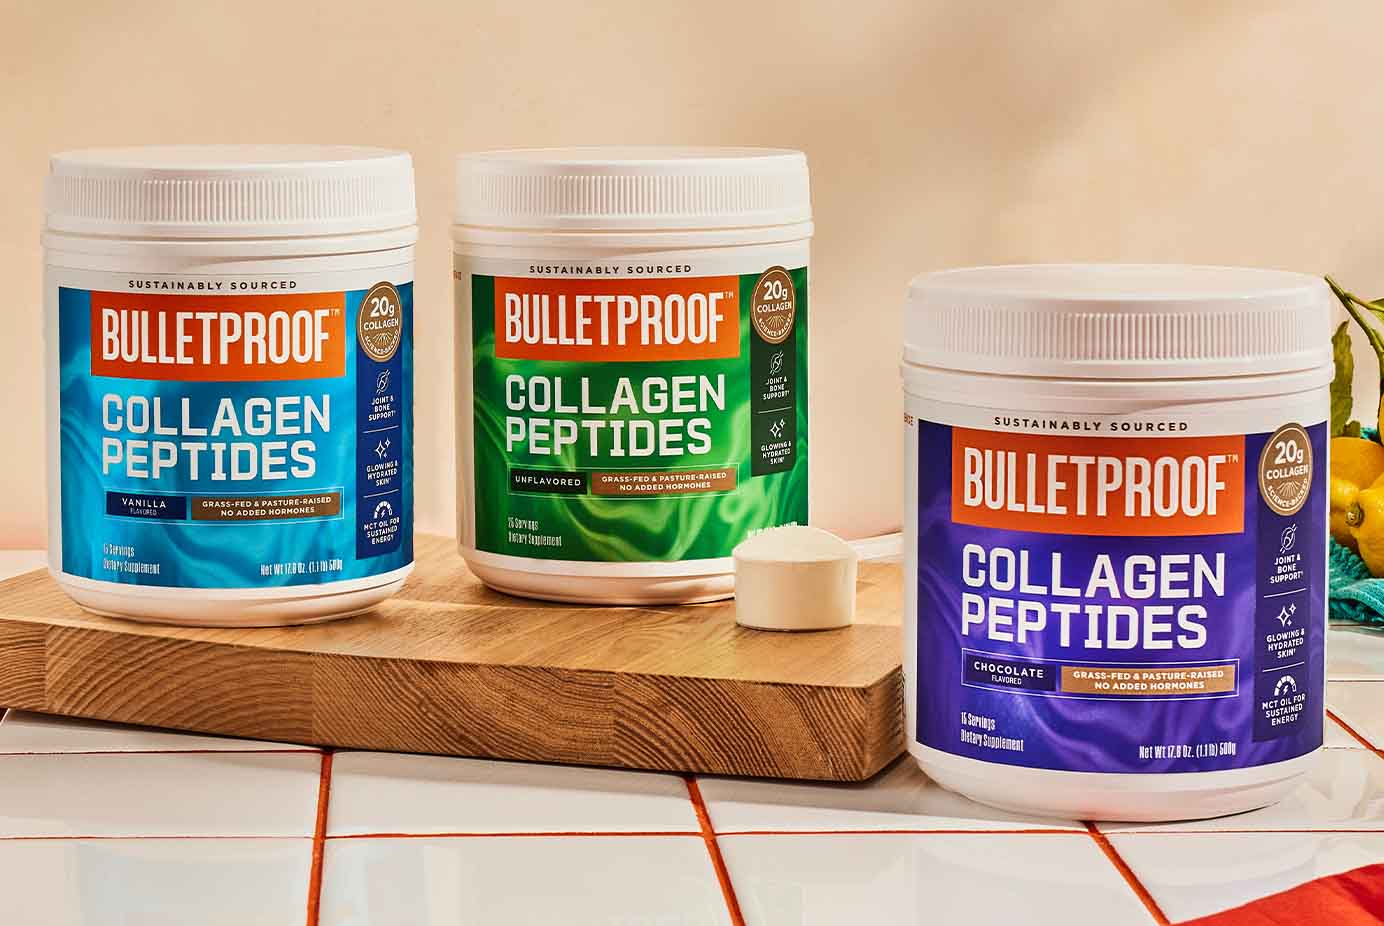 Bulletproof Collagen protein products